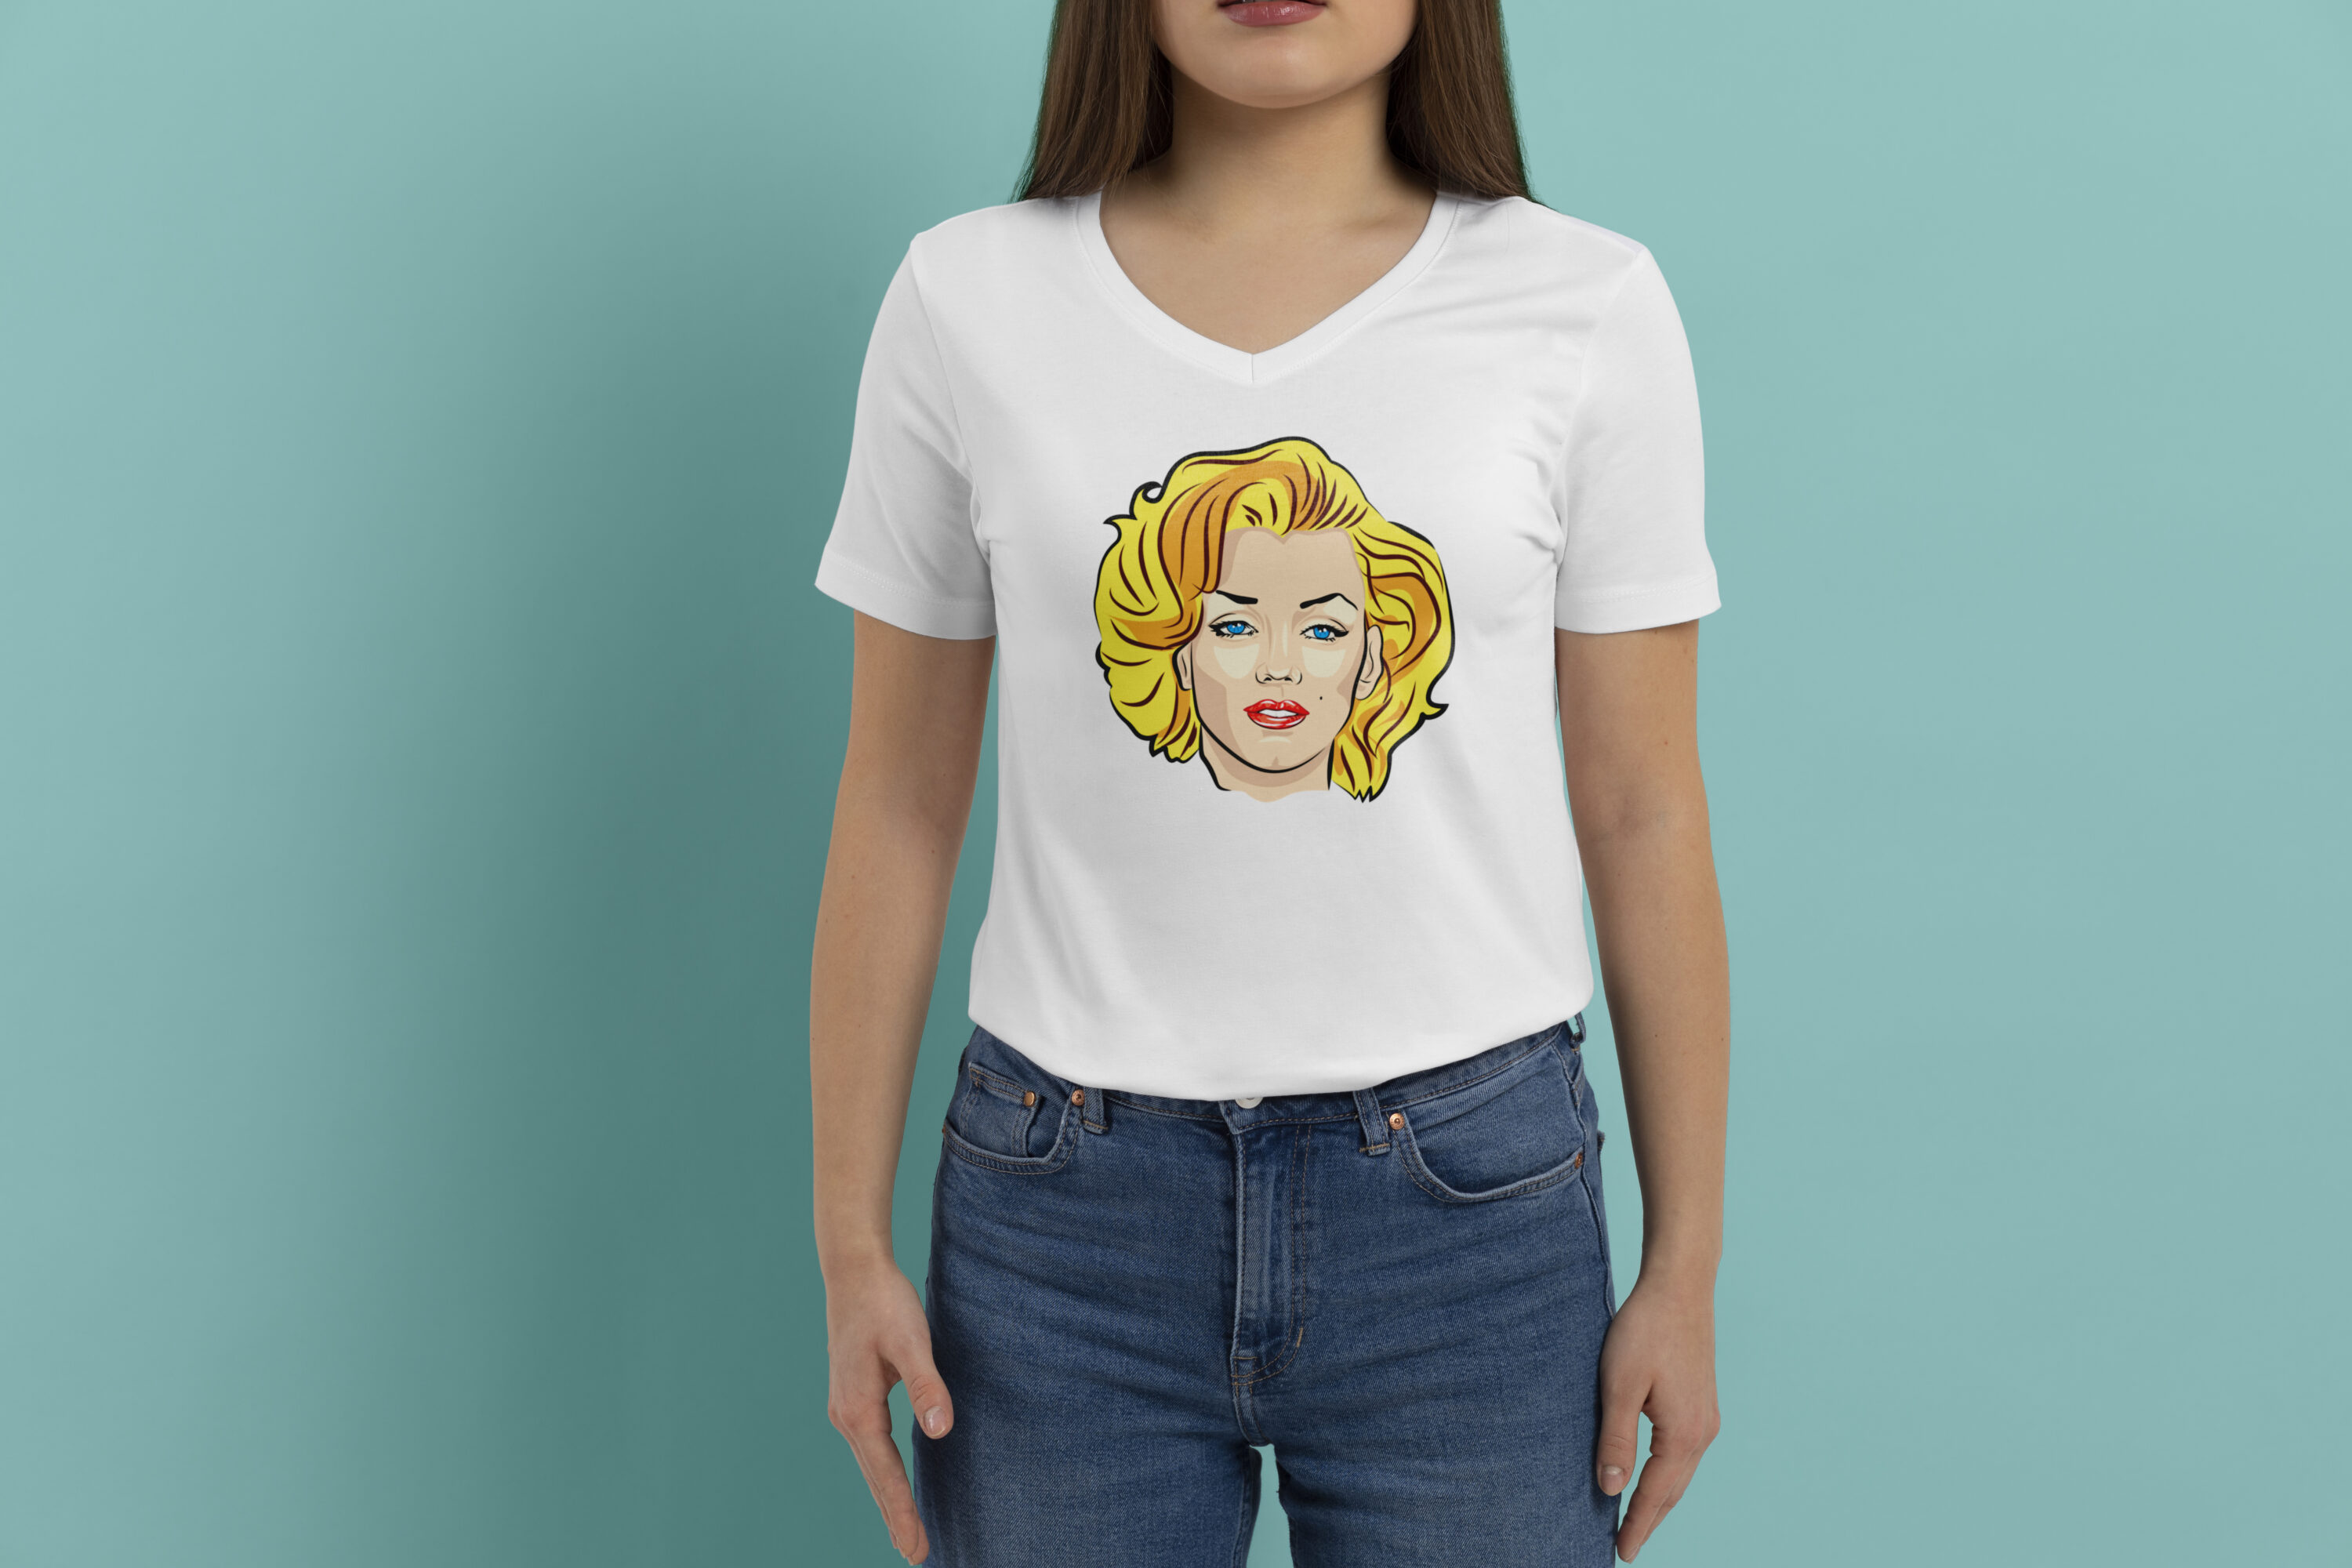 Image of a white t-shirt with a cartoon print of Marilyn Monroe.